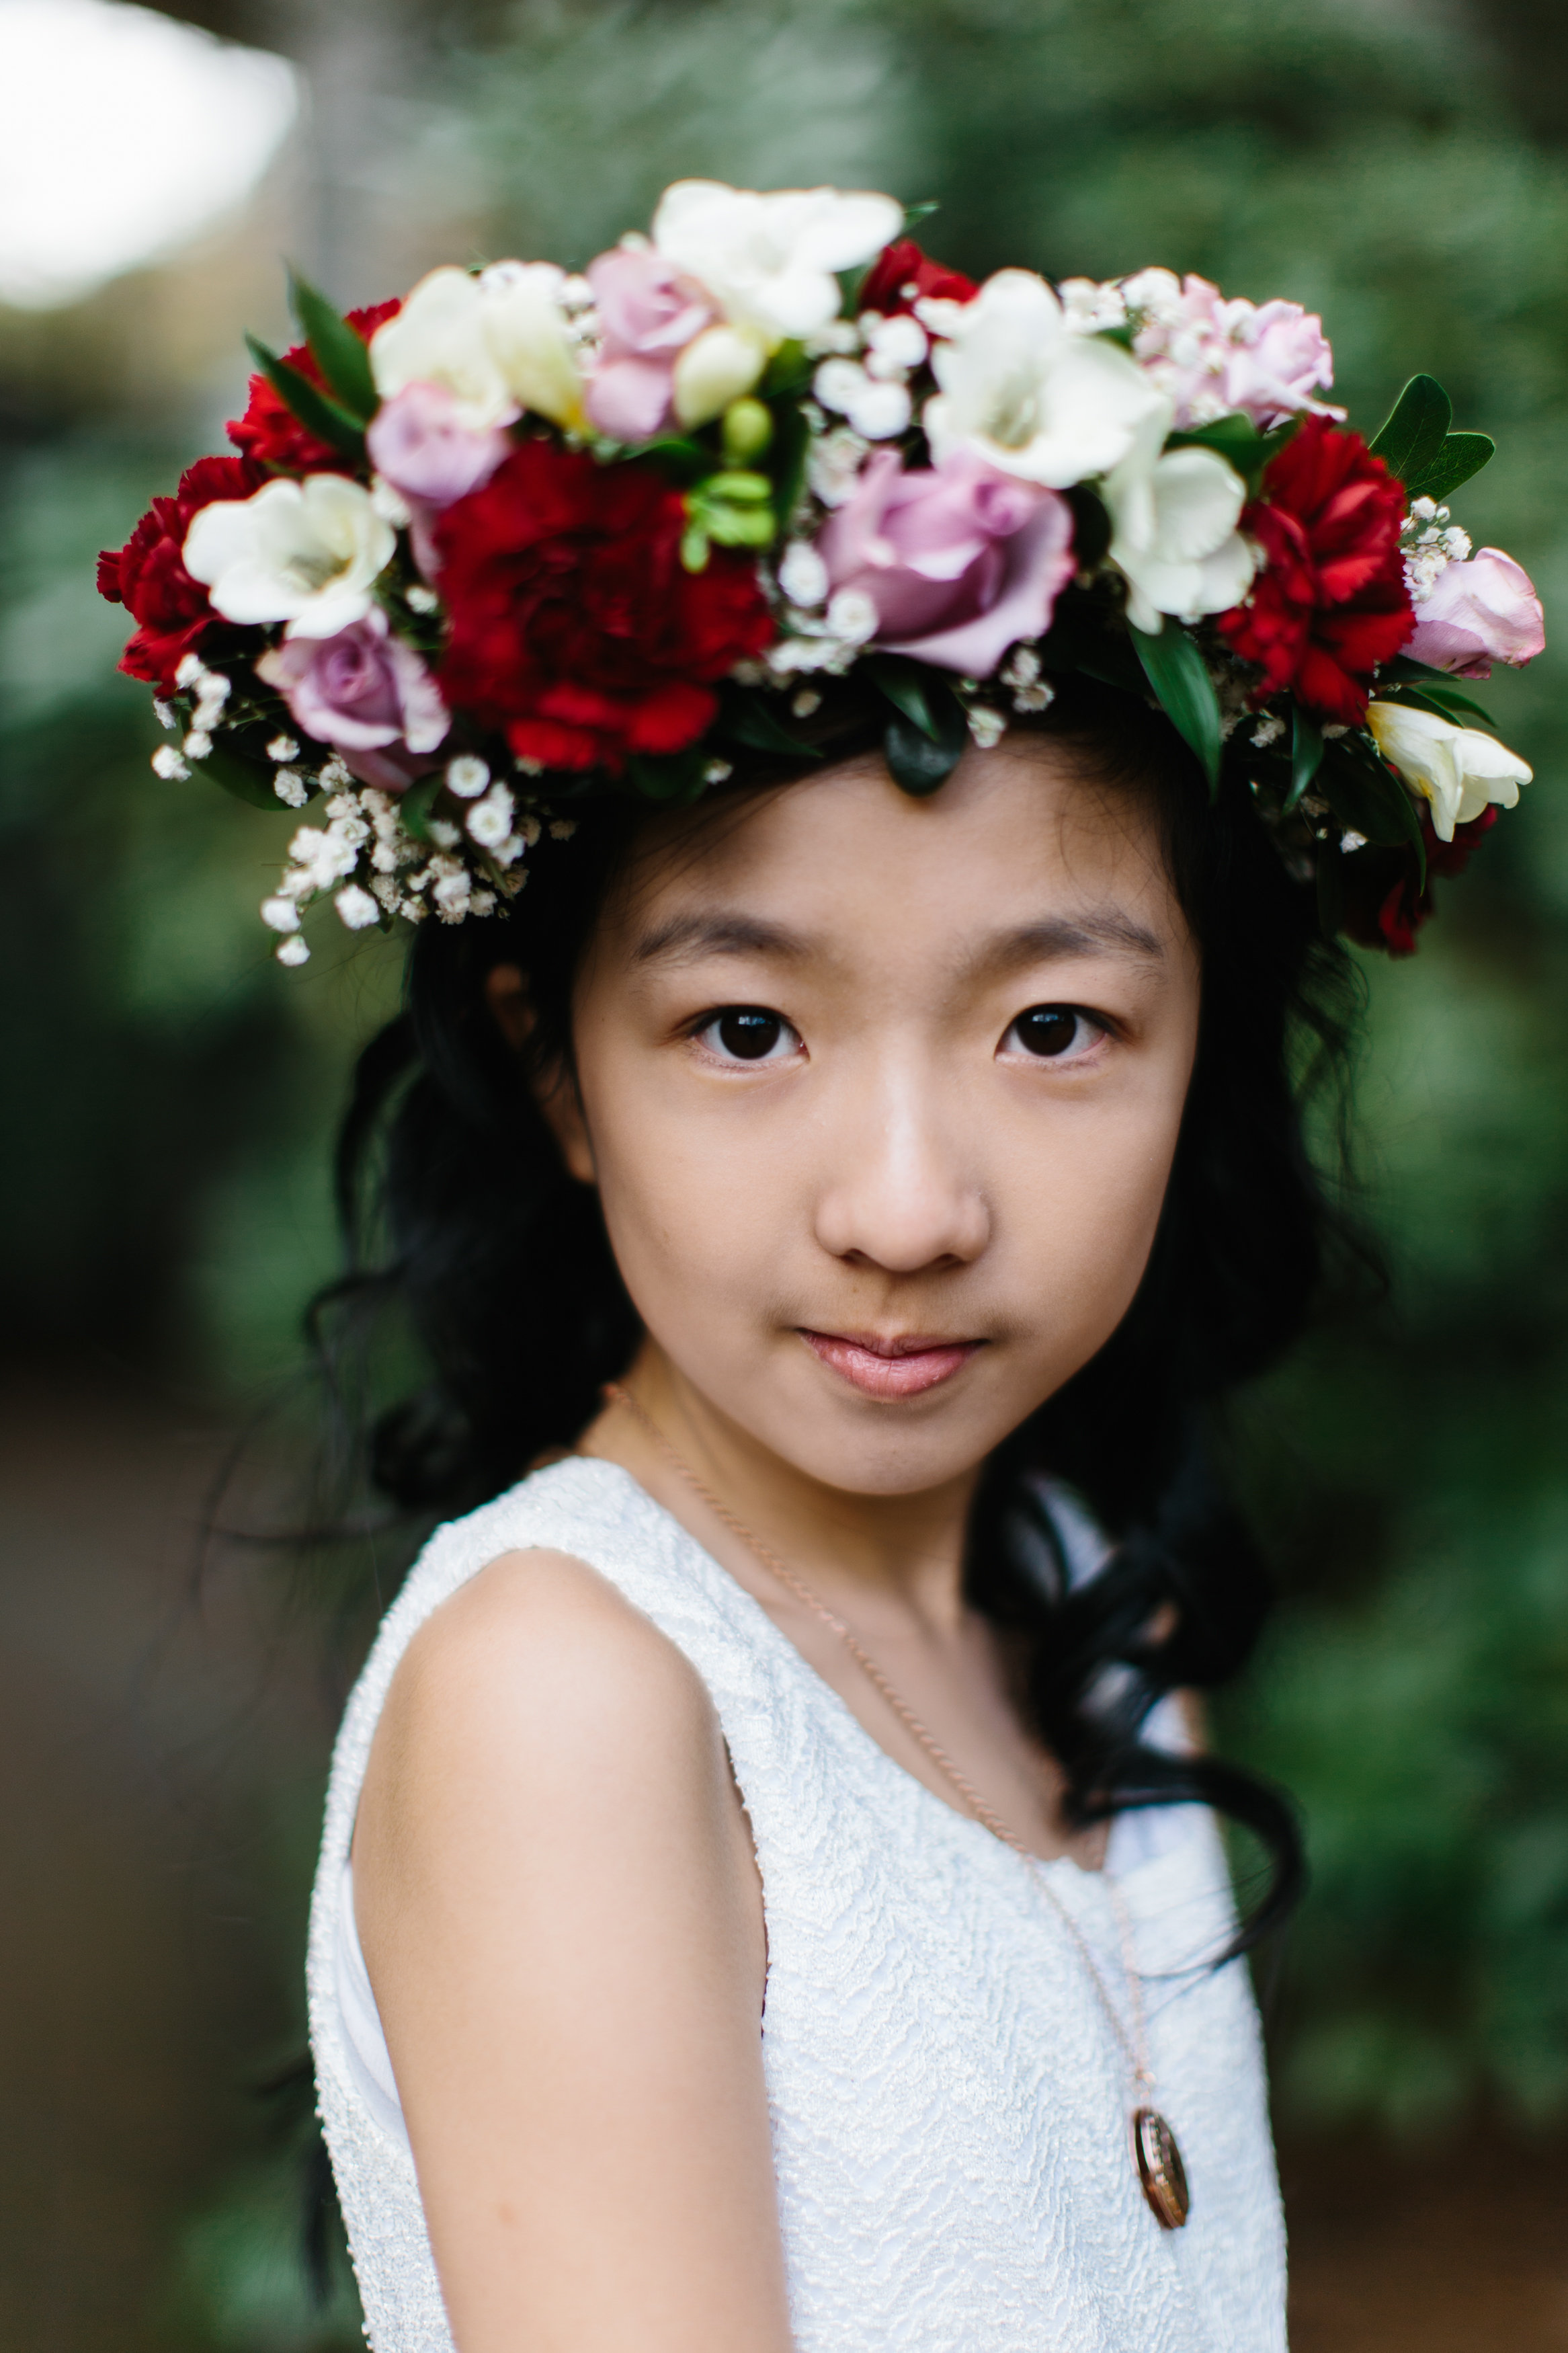  Flower Crown for Flower girl by Abbotsford Wedding Florist, Floral Design by Lili 